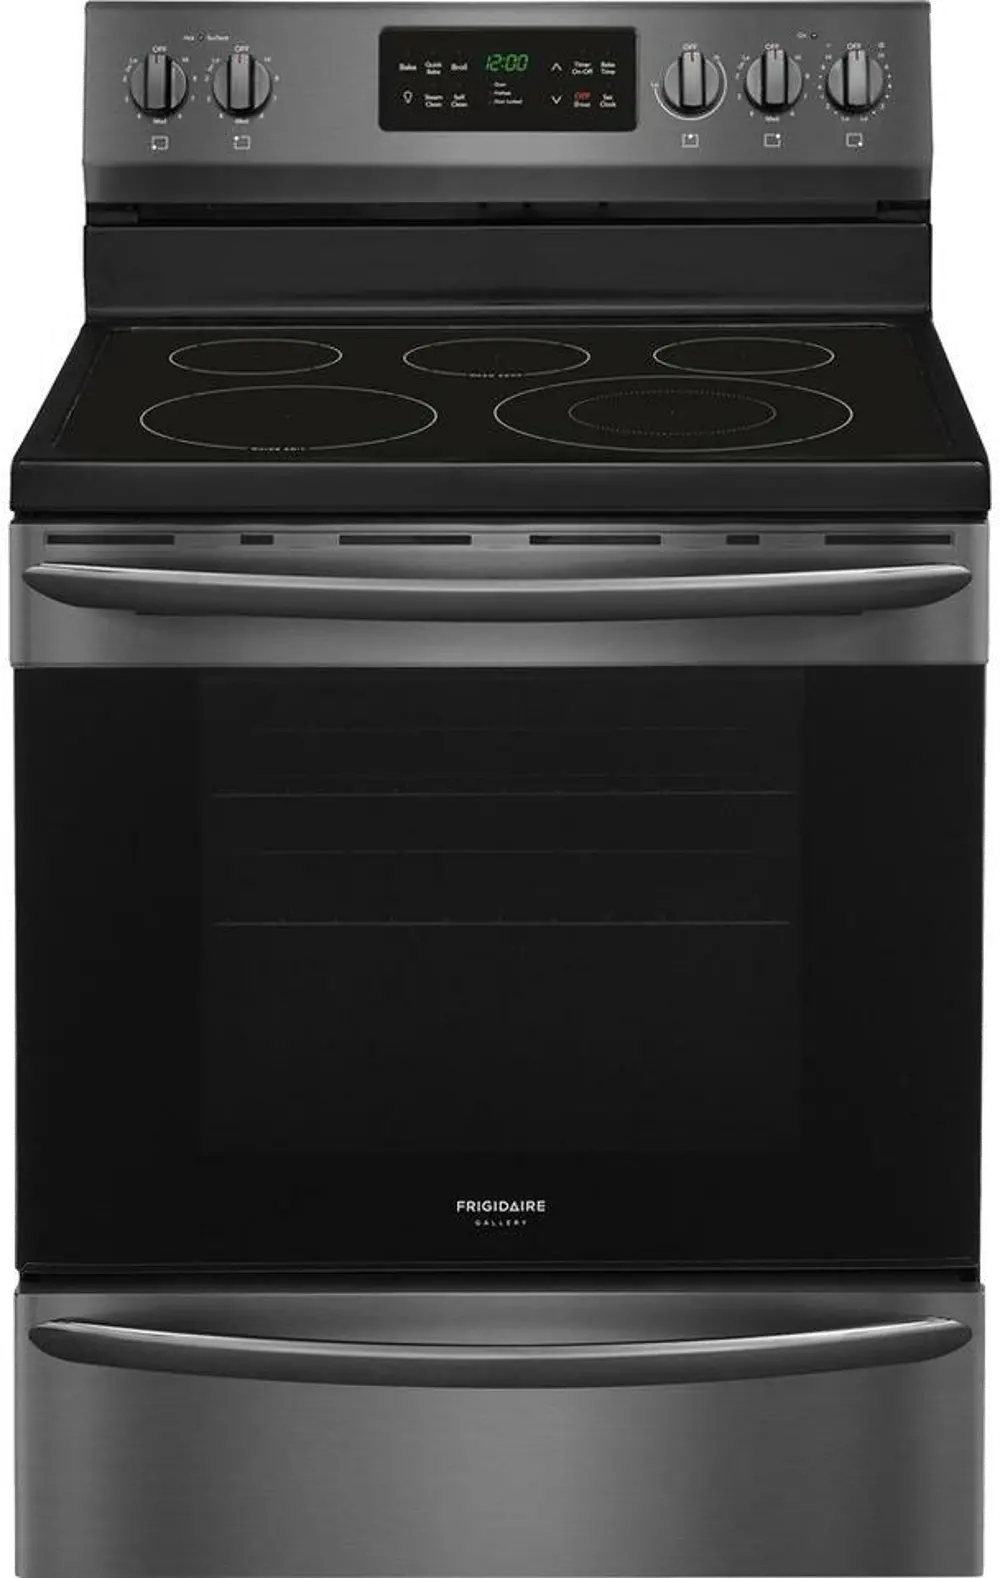 FGEF3036TD-PROJECT Frigidaire Gallery 5.3 cu ft Electric Range - Black Stainless Steel-1